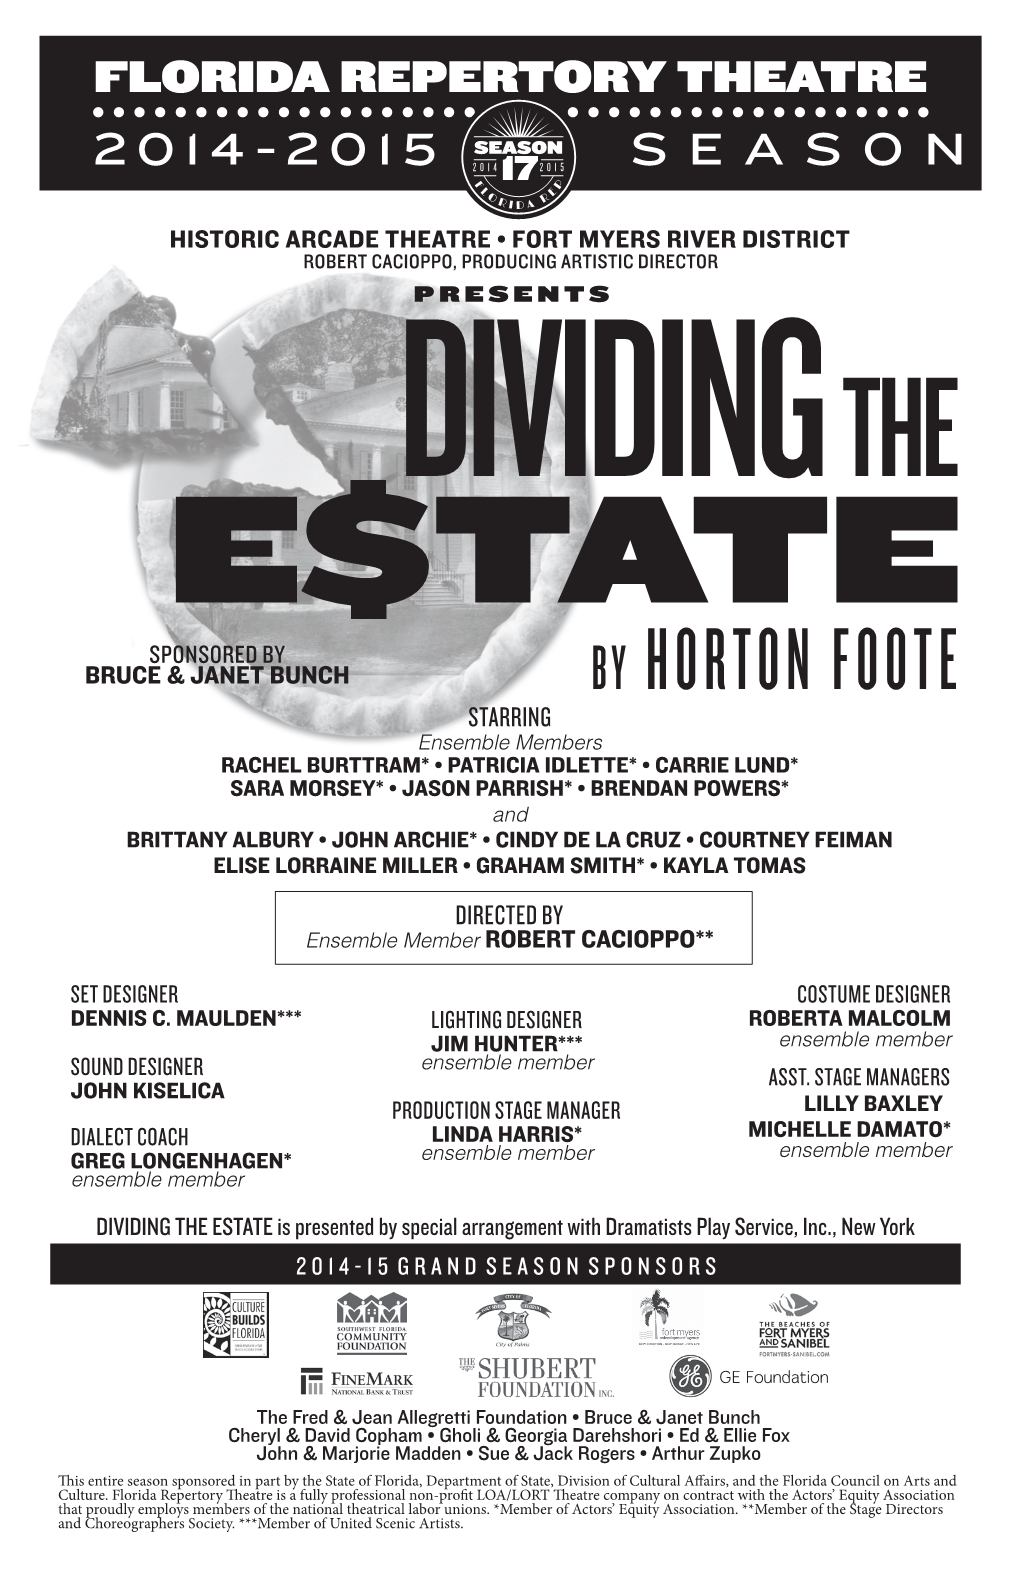 DIVIDING the ESTATE Is Presented by Special Arrangement with Dramatists Play Service, Inc., New York 2014-15 GRAND SEASON SPONSORS